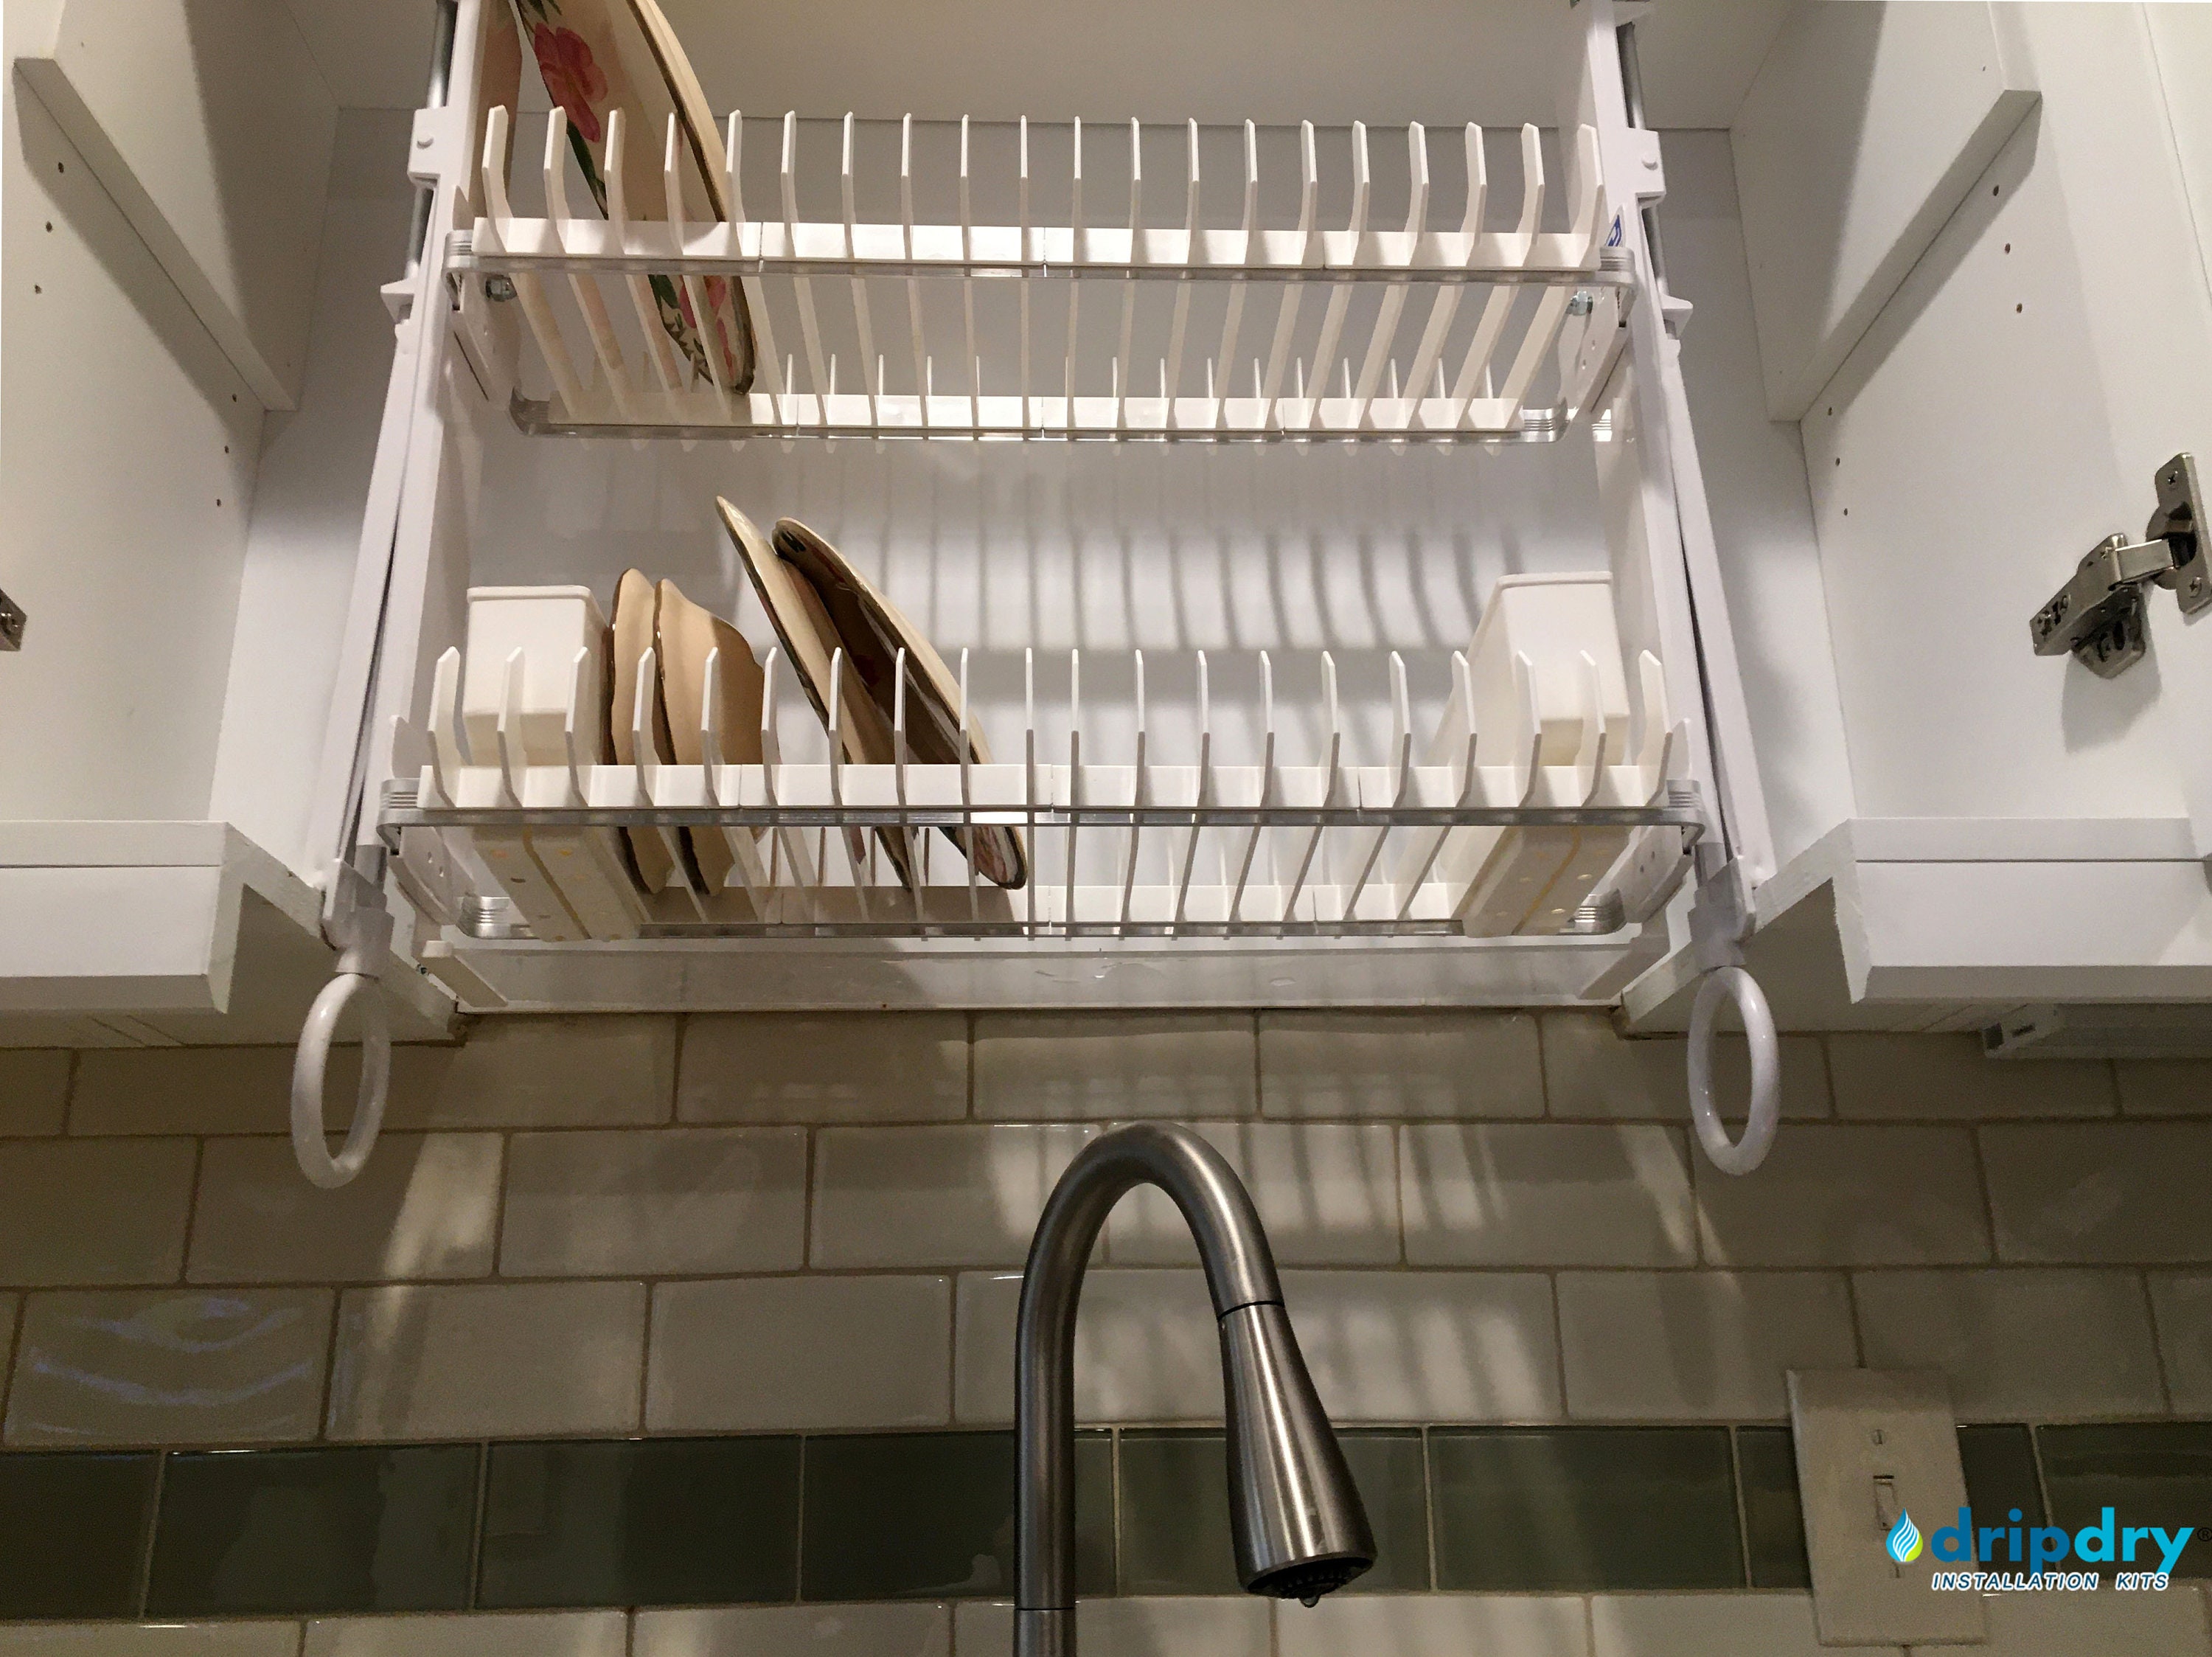 European Dish Rack Above the Sink. Dish Drying Rack Built Inside the  Cabinet 